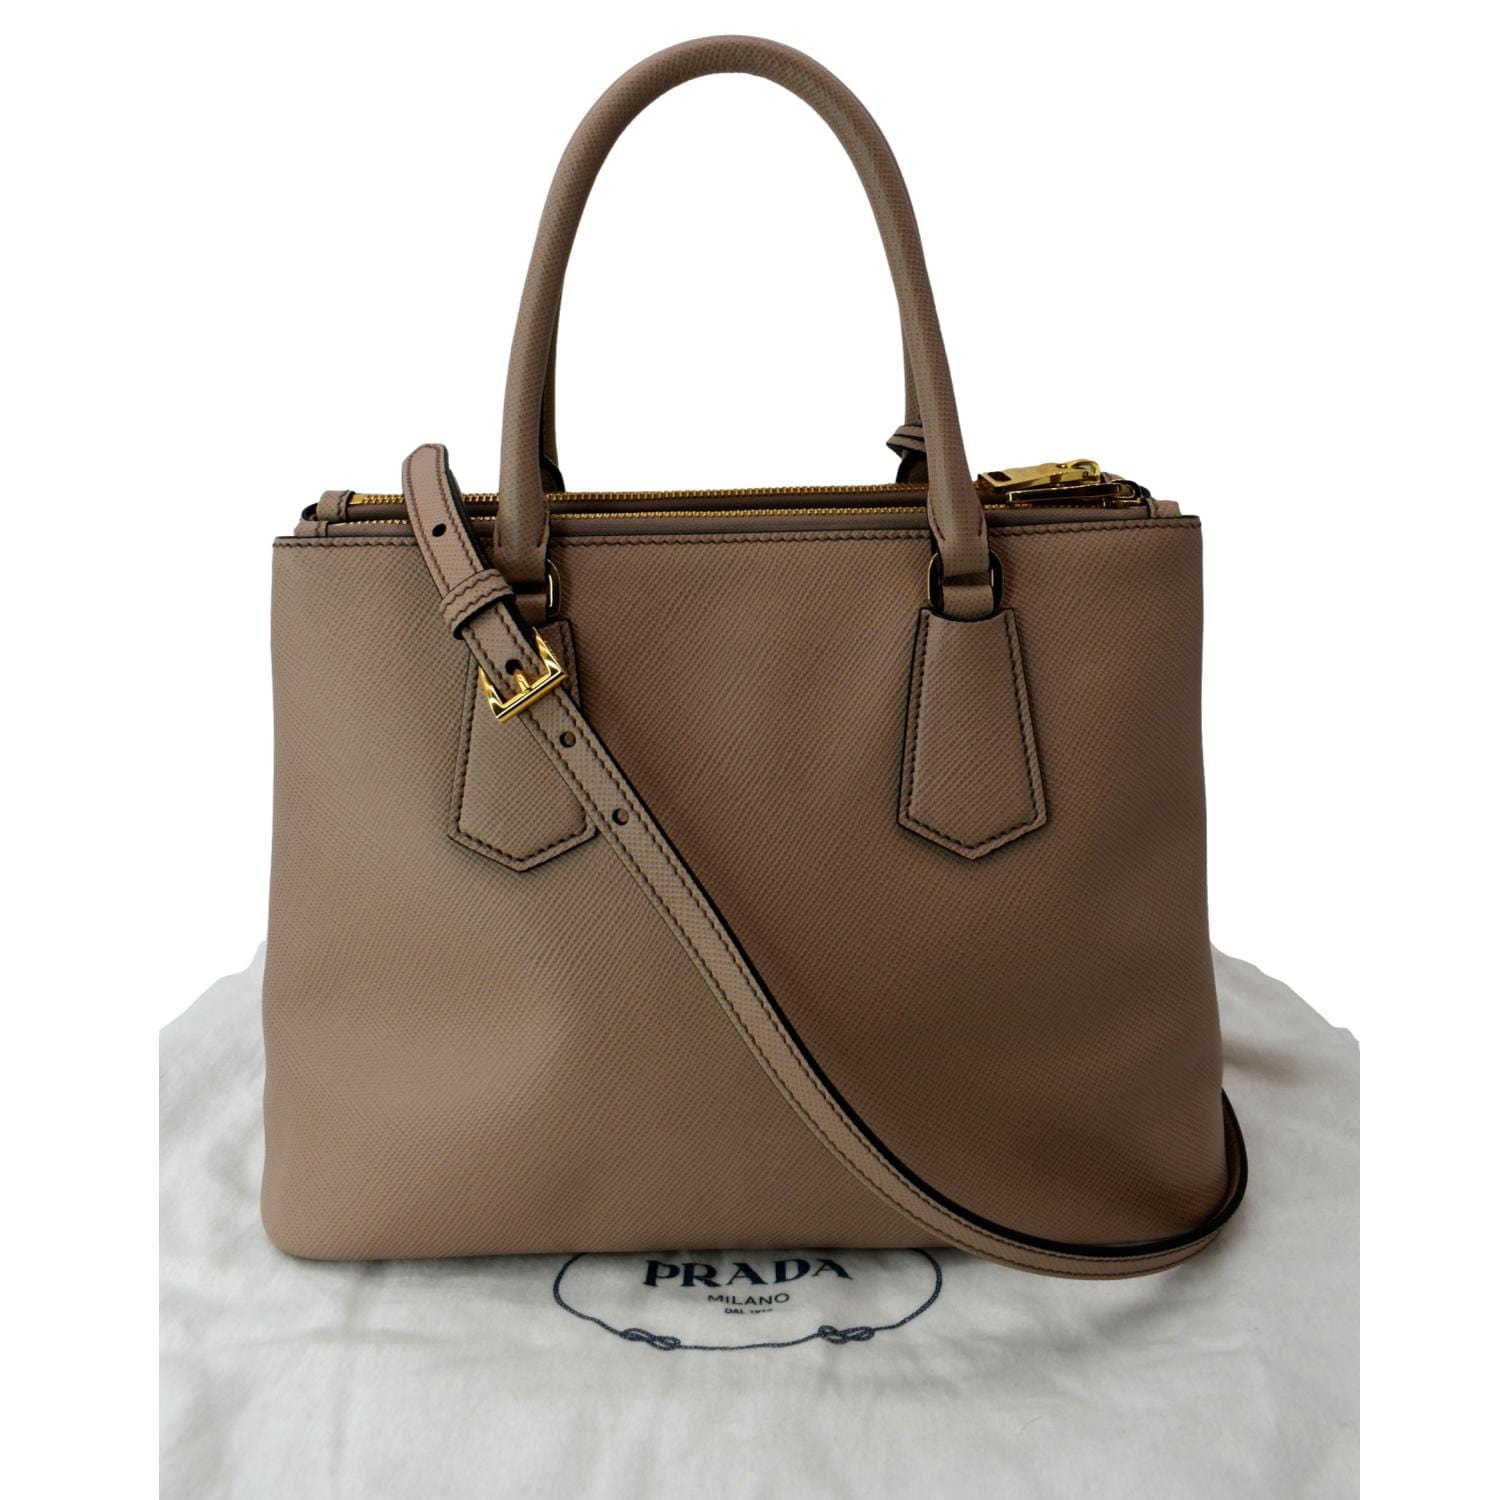 Prada Saffiano Leather Double Medium Handle Tote Bag for Sale in Los  Angeles, CA - OfferUp